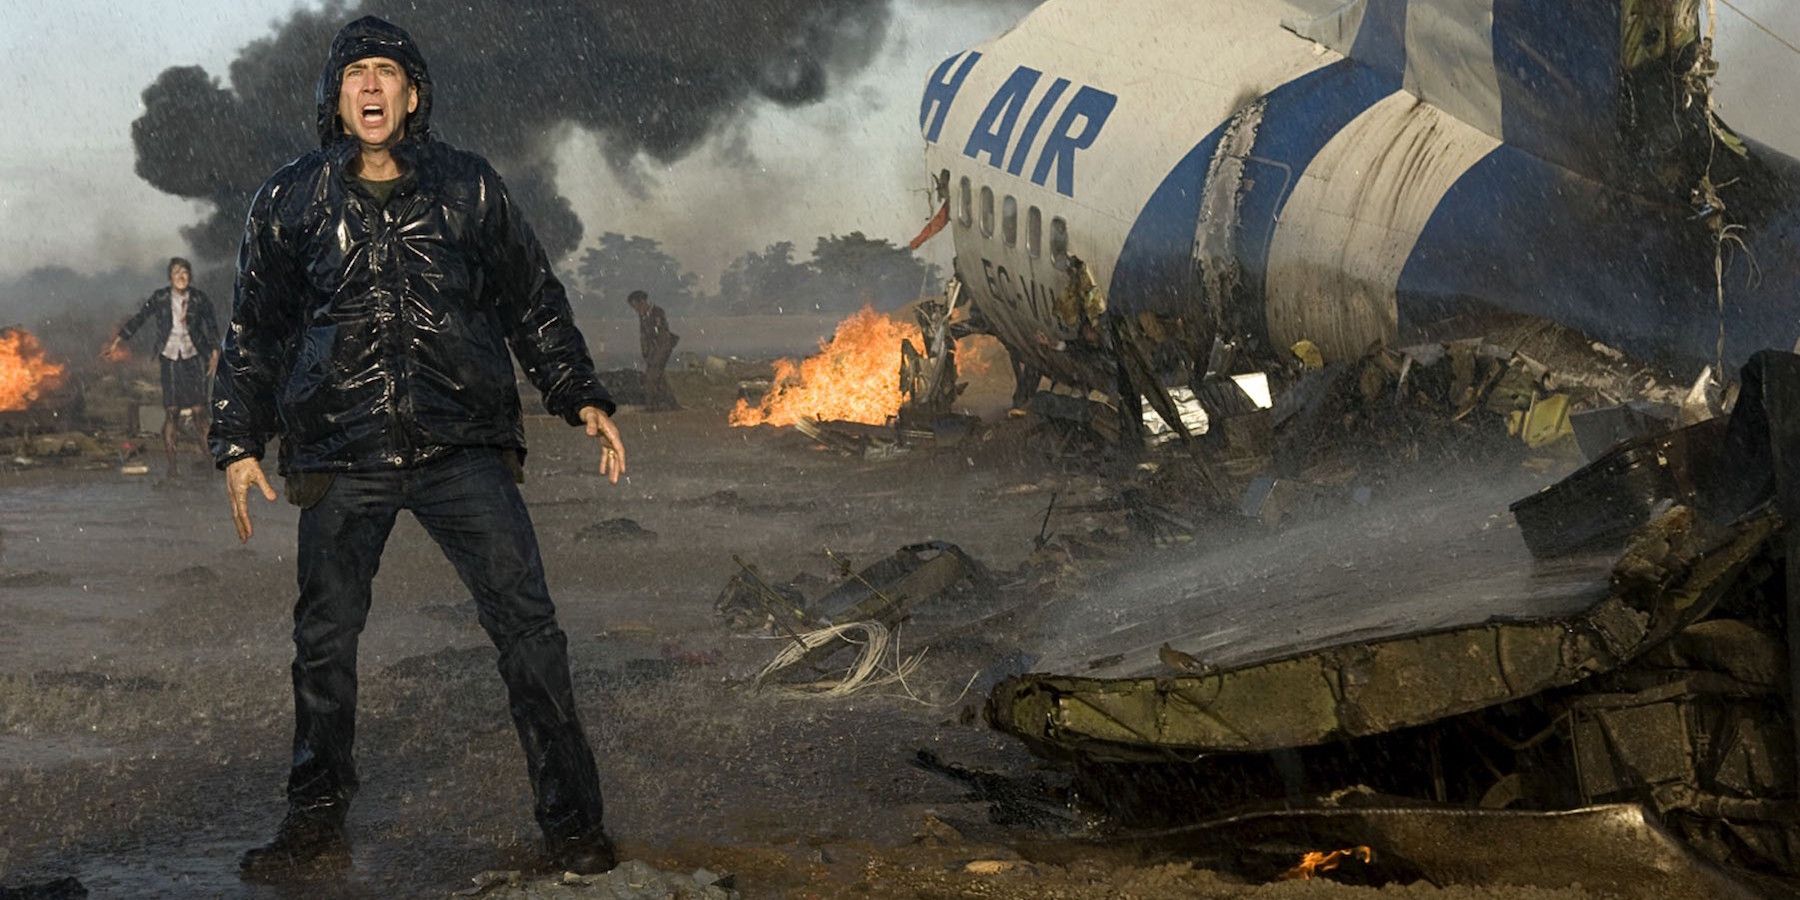 Nicolas Cage next to a crashed plane in Knowing